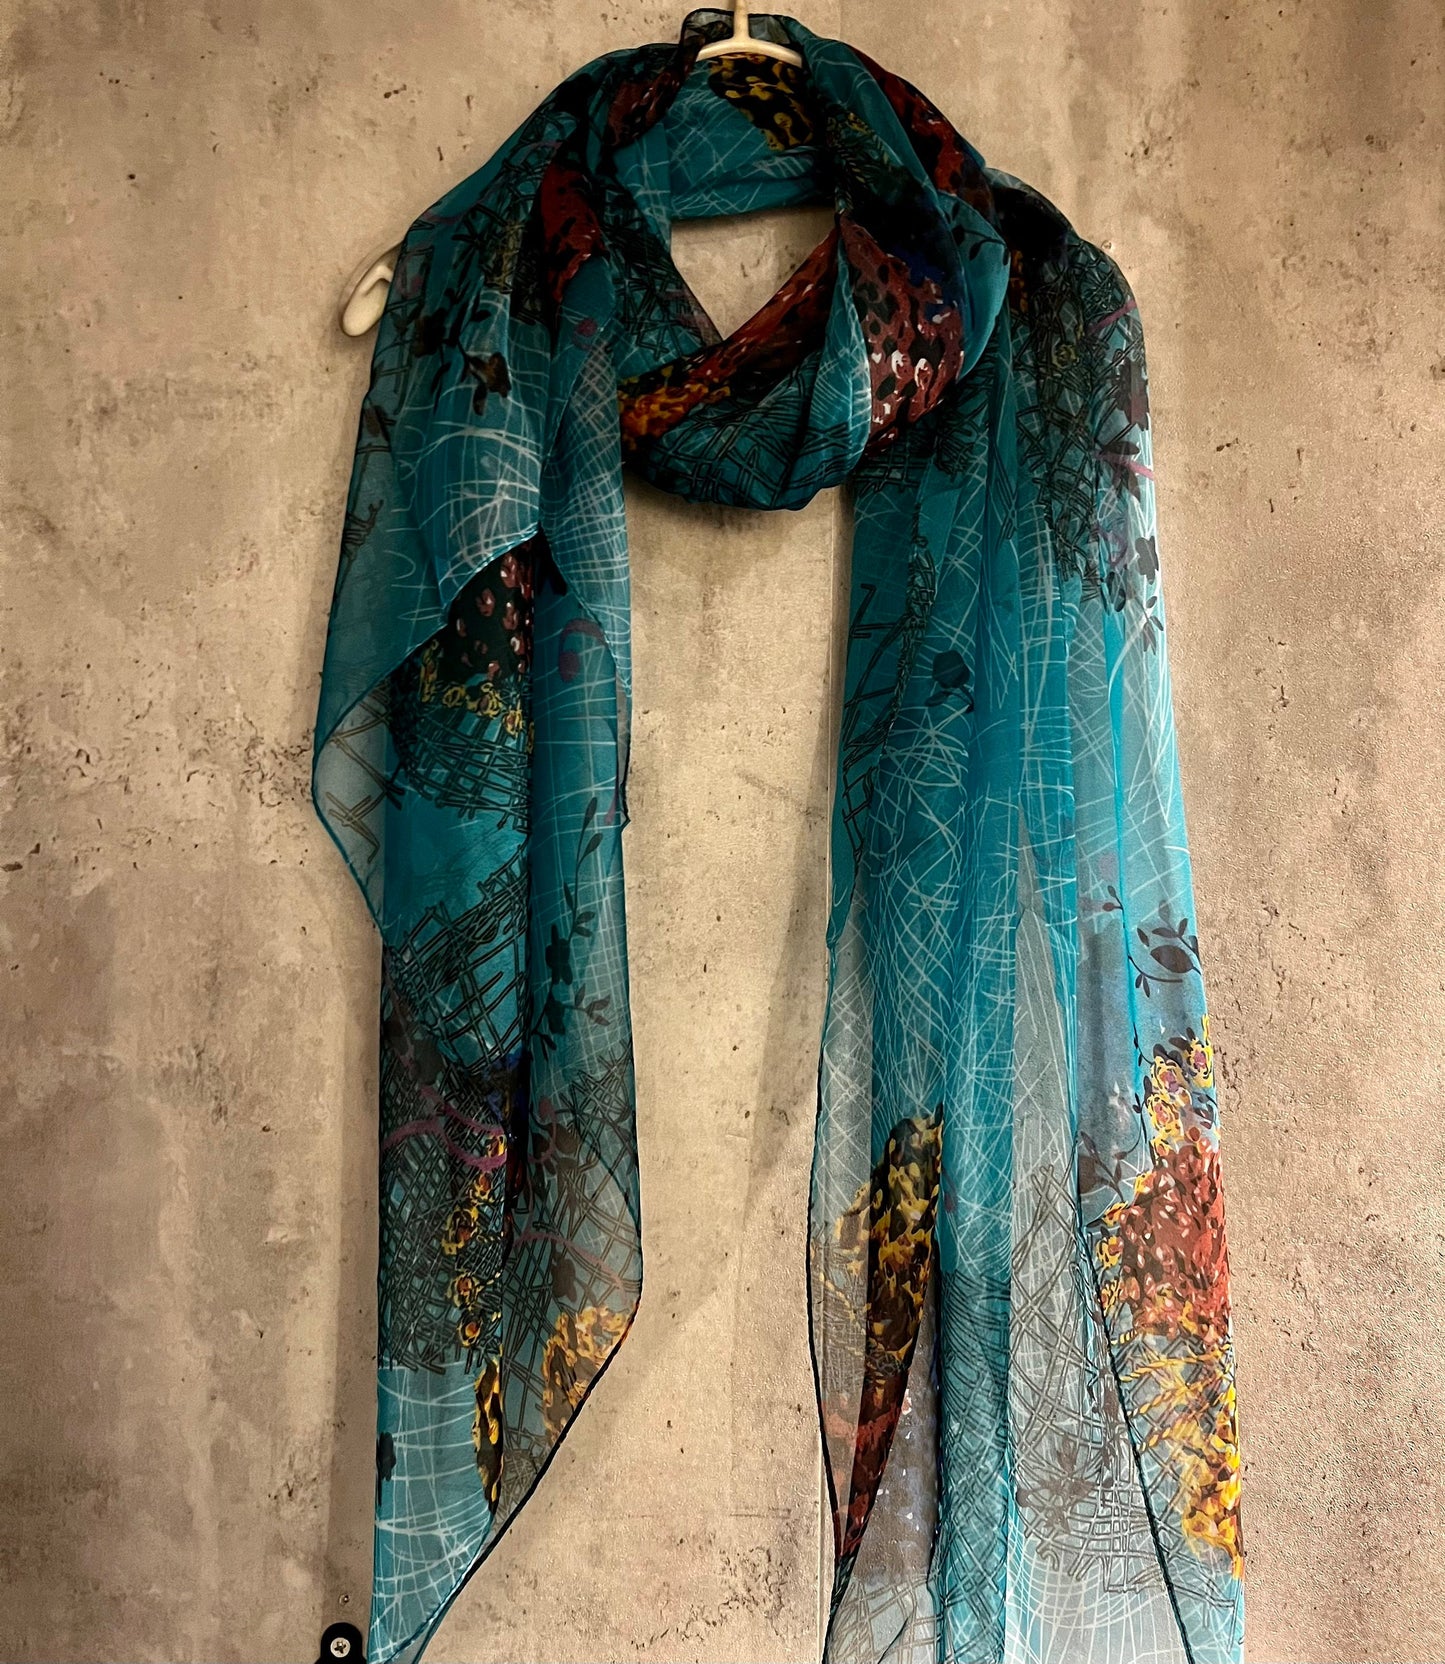 Ethnic Flowers Blue Silk Scarf/Spring Summer Autumn Scarf/Scarf Women/Gifts For Her Birthday Christmas/UK Seller/Evening Wedding Scarf